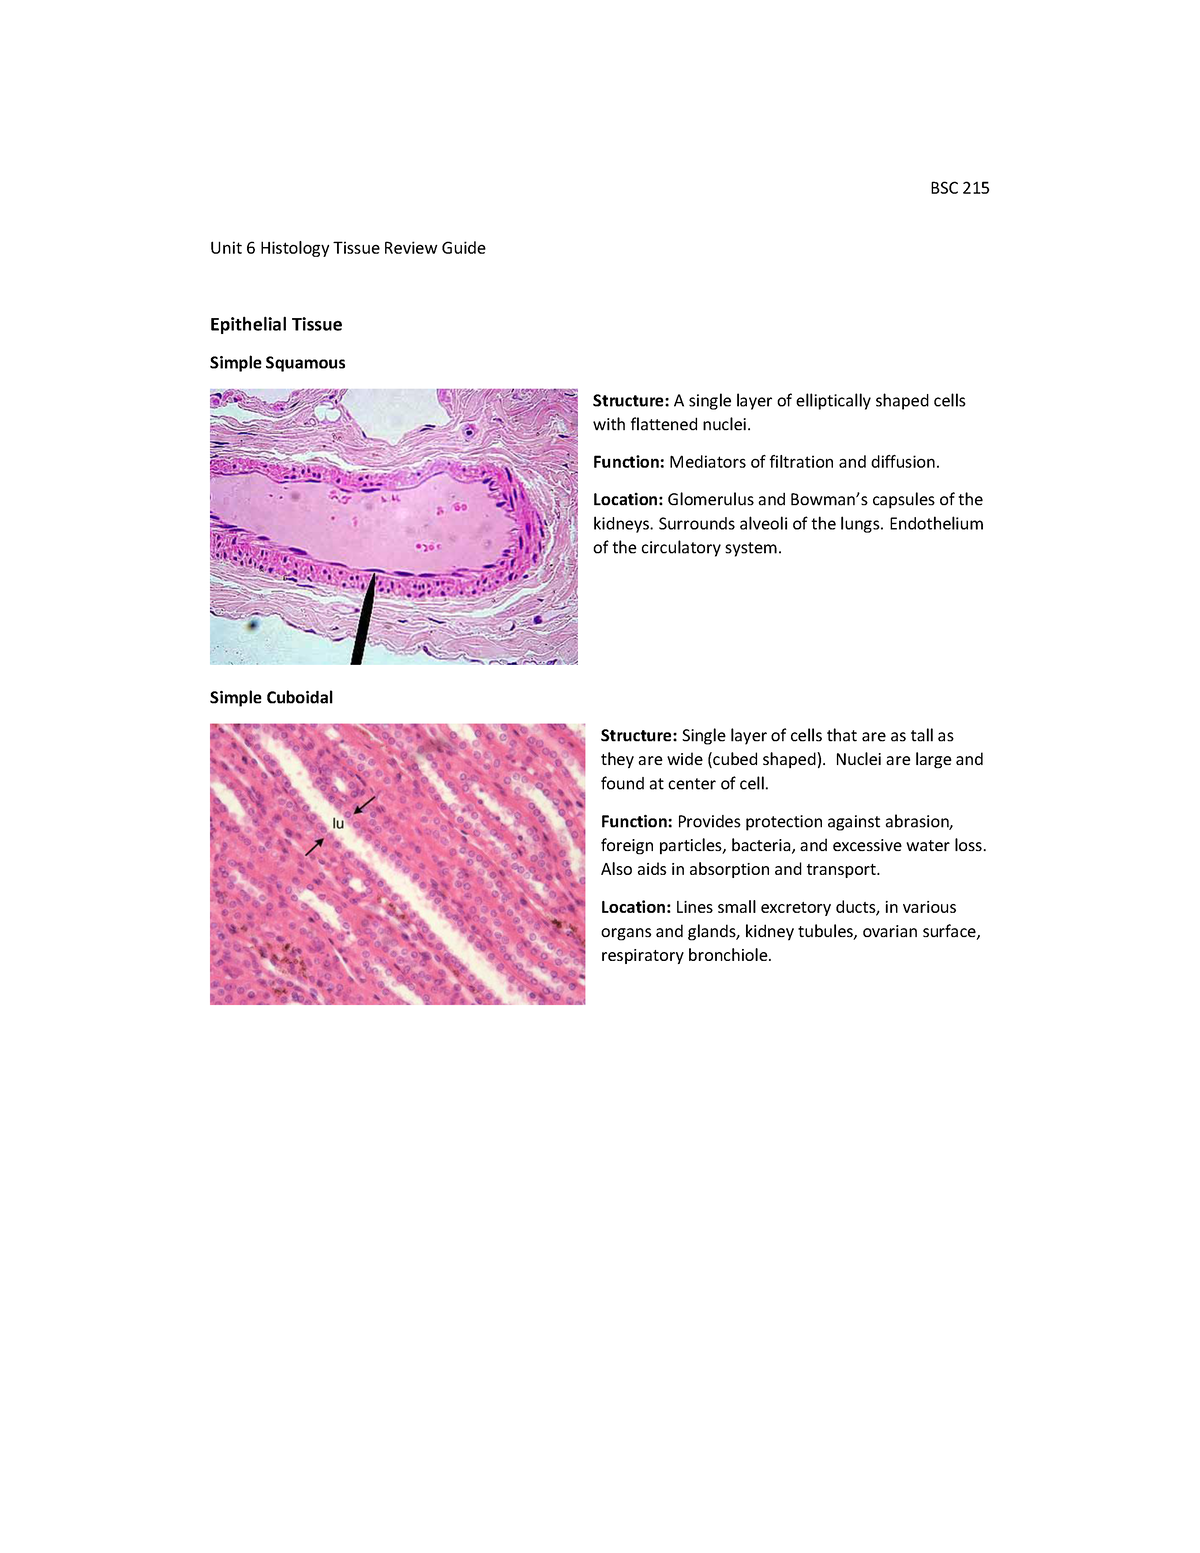 Histology review - Unit 6 Histology Tissue Review Guide Epithelial ...